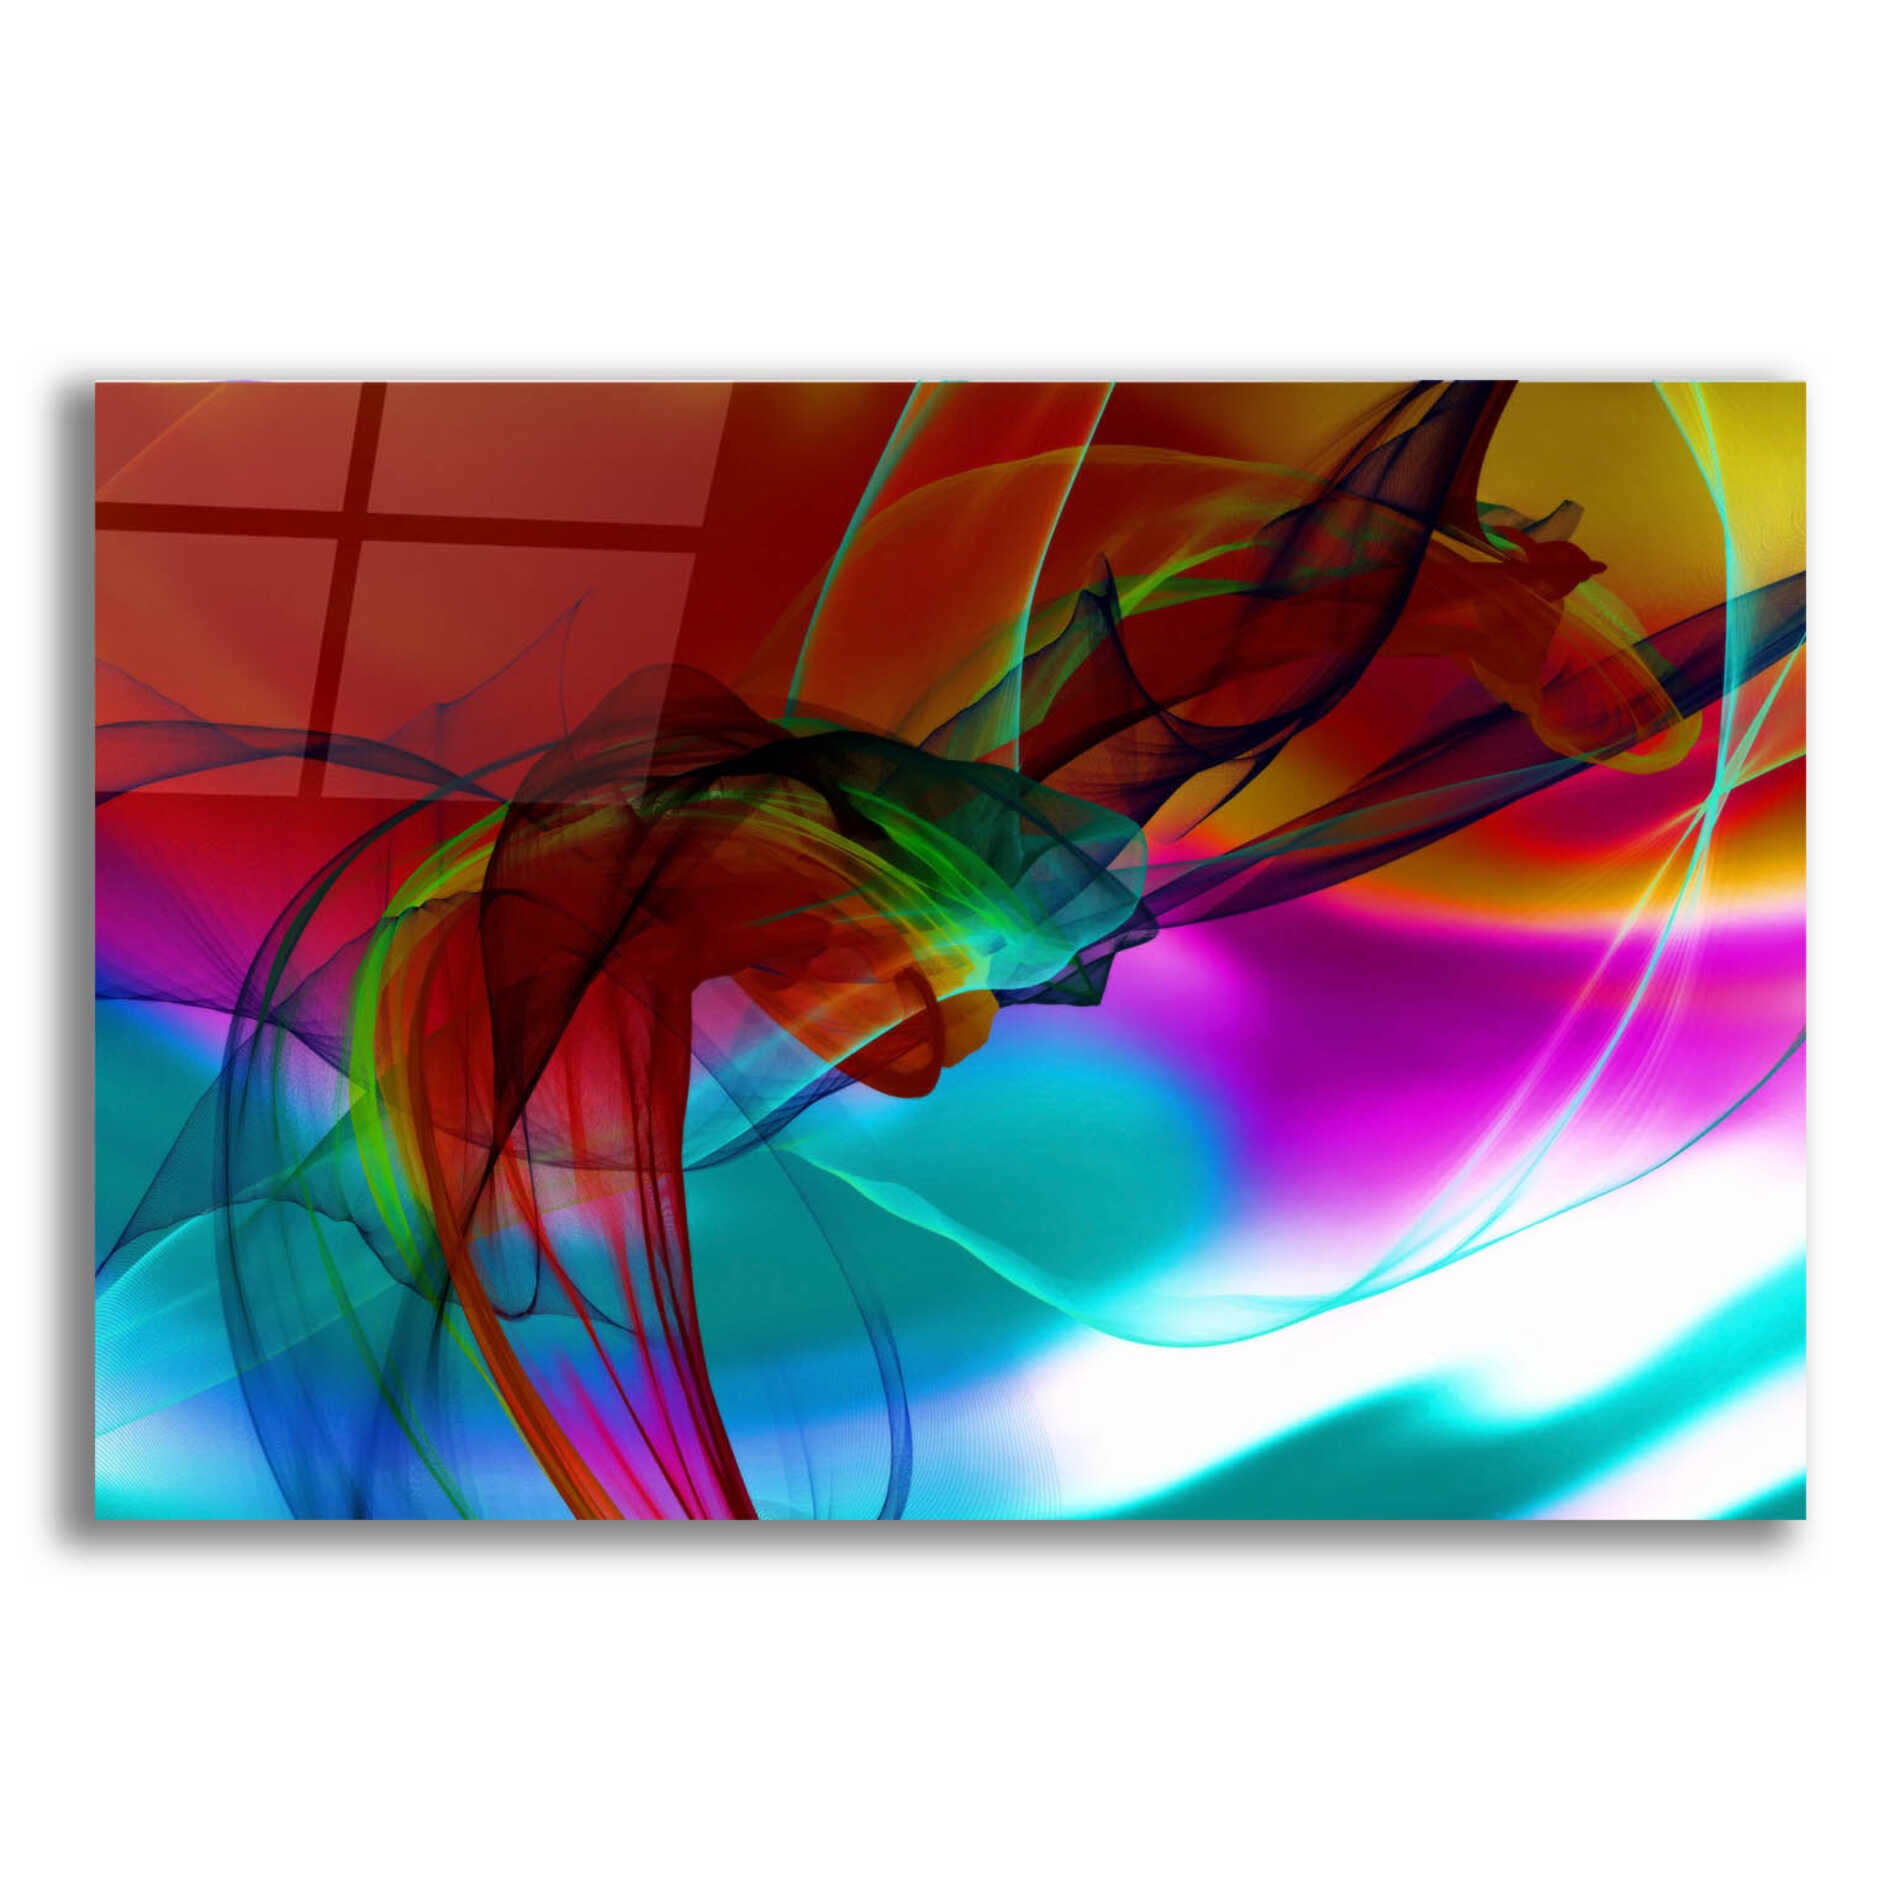 Epic Art 'Color In The Lines 16' by Irena Orlov, Acrylic Glass Wall Art,24x16